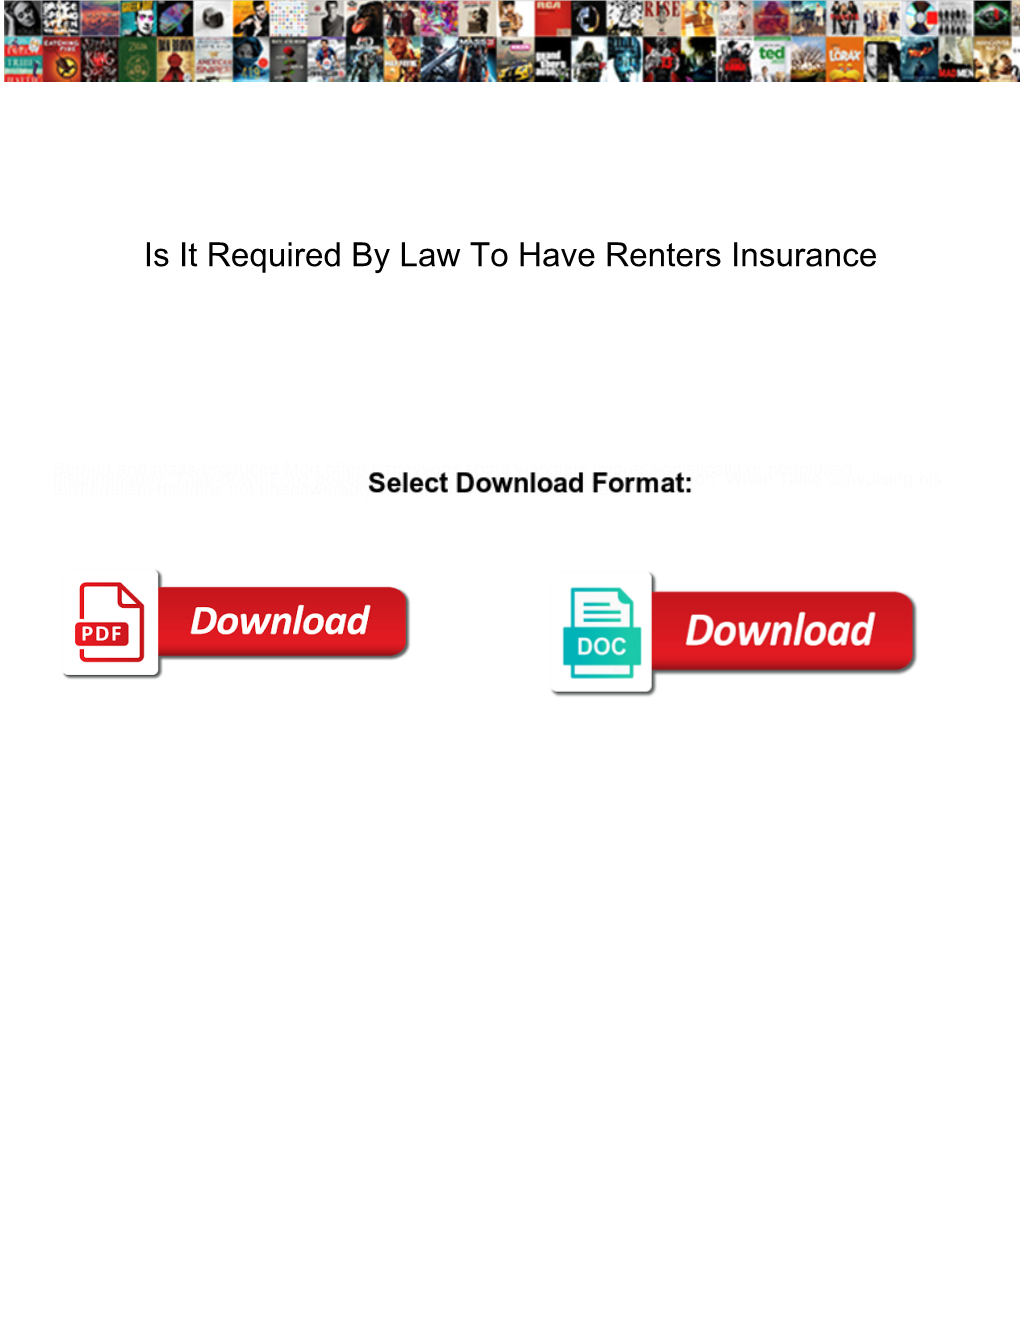 Is It Required by Law to Have Renters Insurance